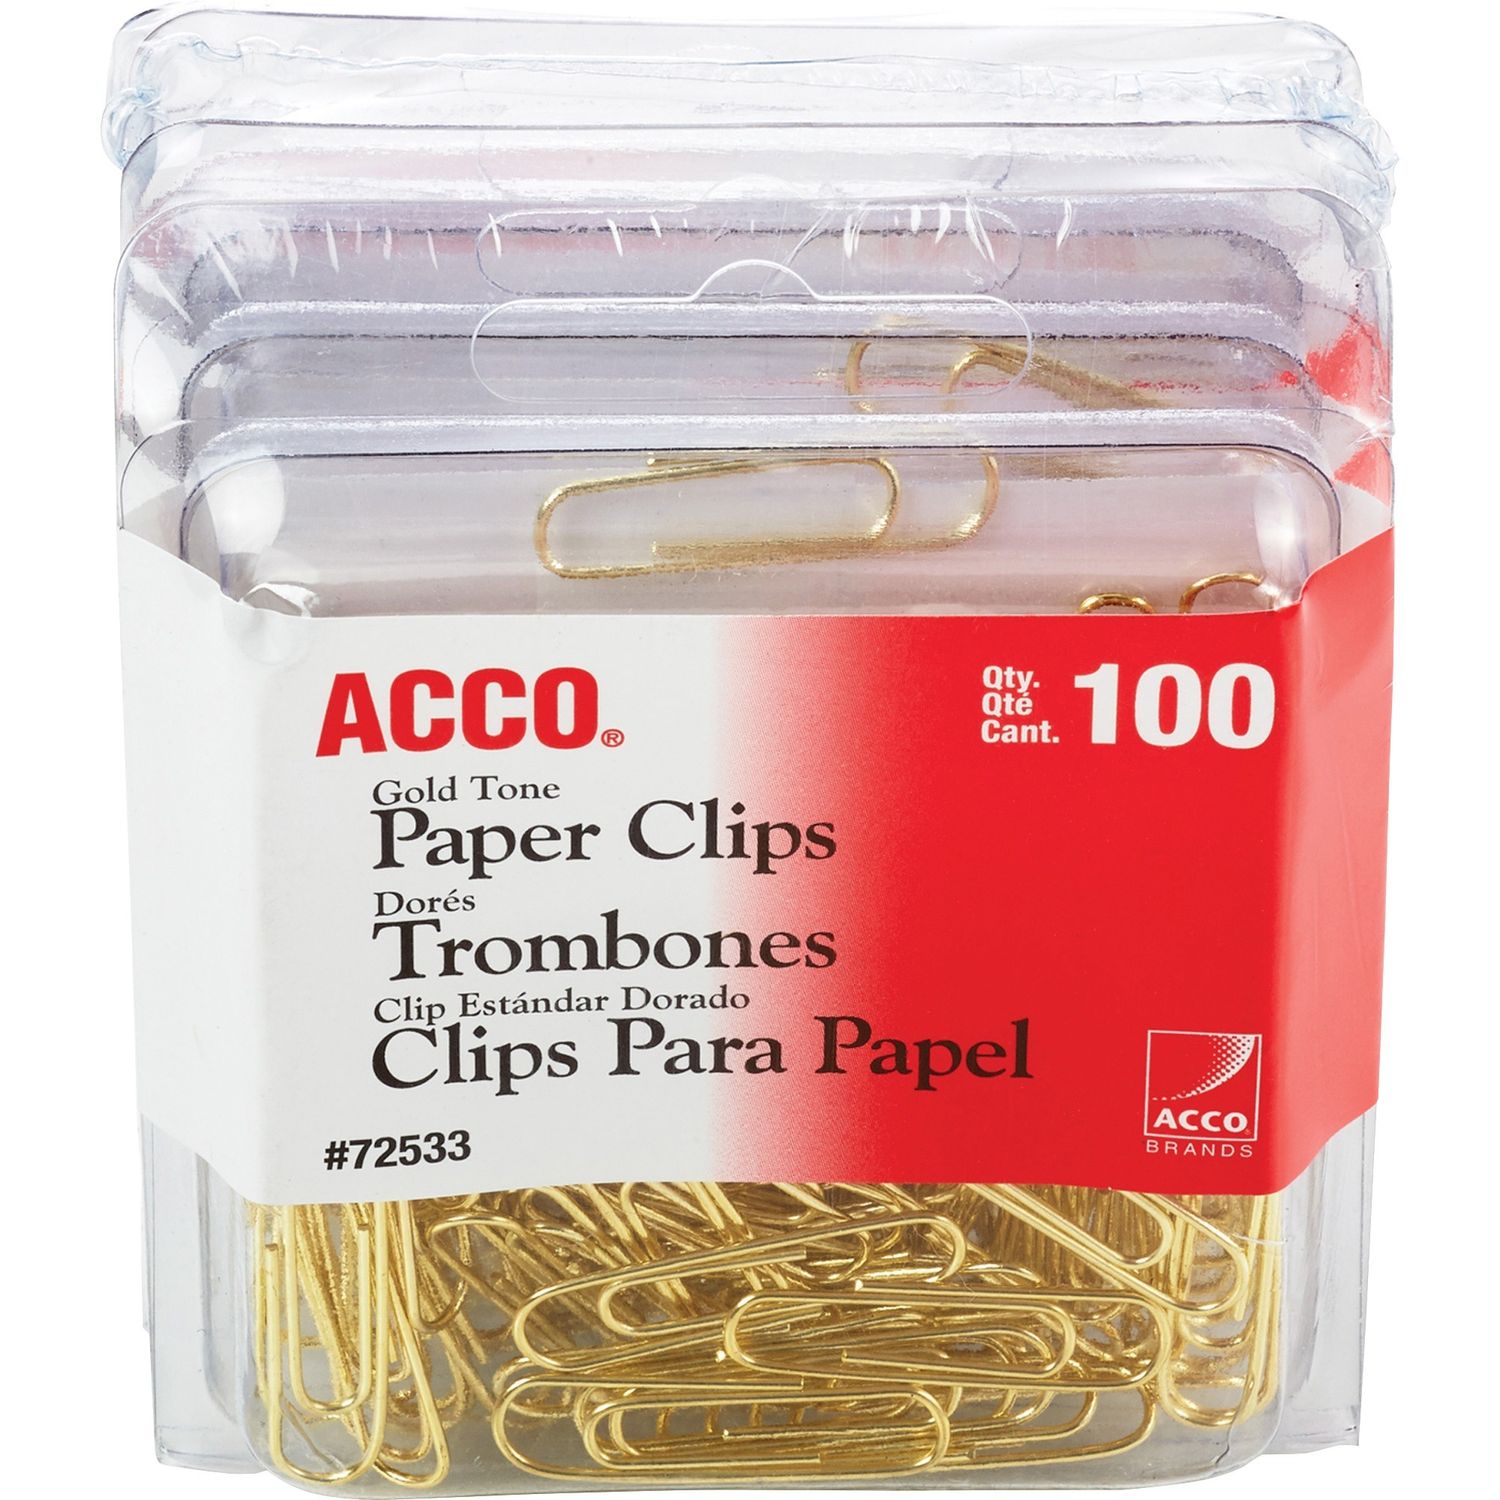 Gold Tone Paper Clips Regular, No. 2, 10 Sheet Capacity, for Office, Home, School, Document, Paper, Sturdy, Flex Resistant, Bend Resistant, 400 / Pack, Gold